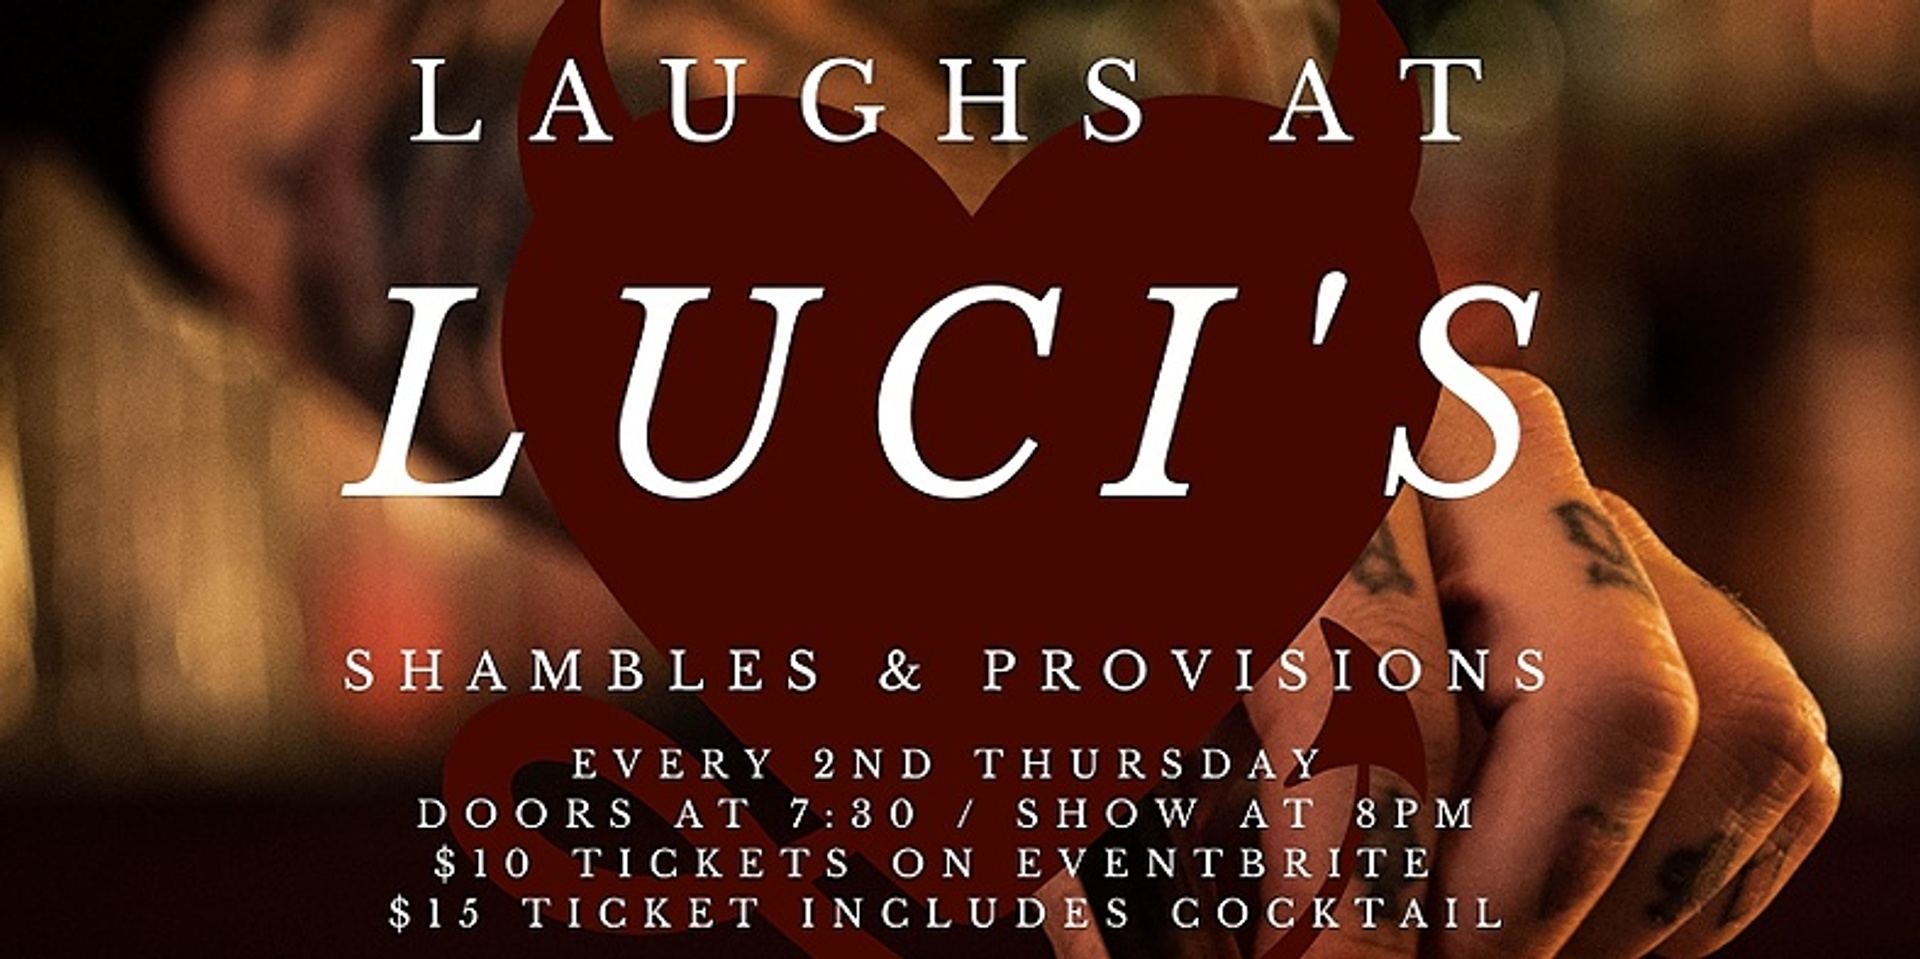 Laughs at Luci's Shambles & Provisions